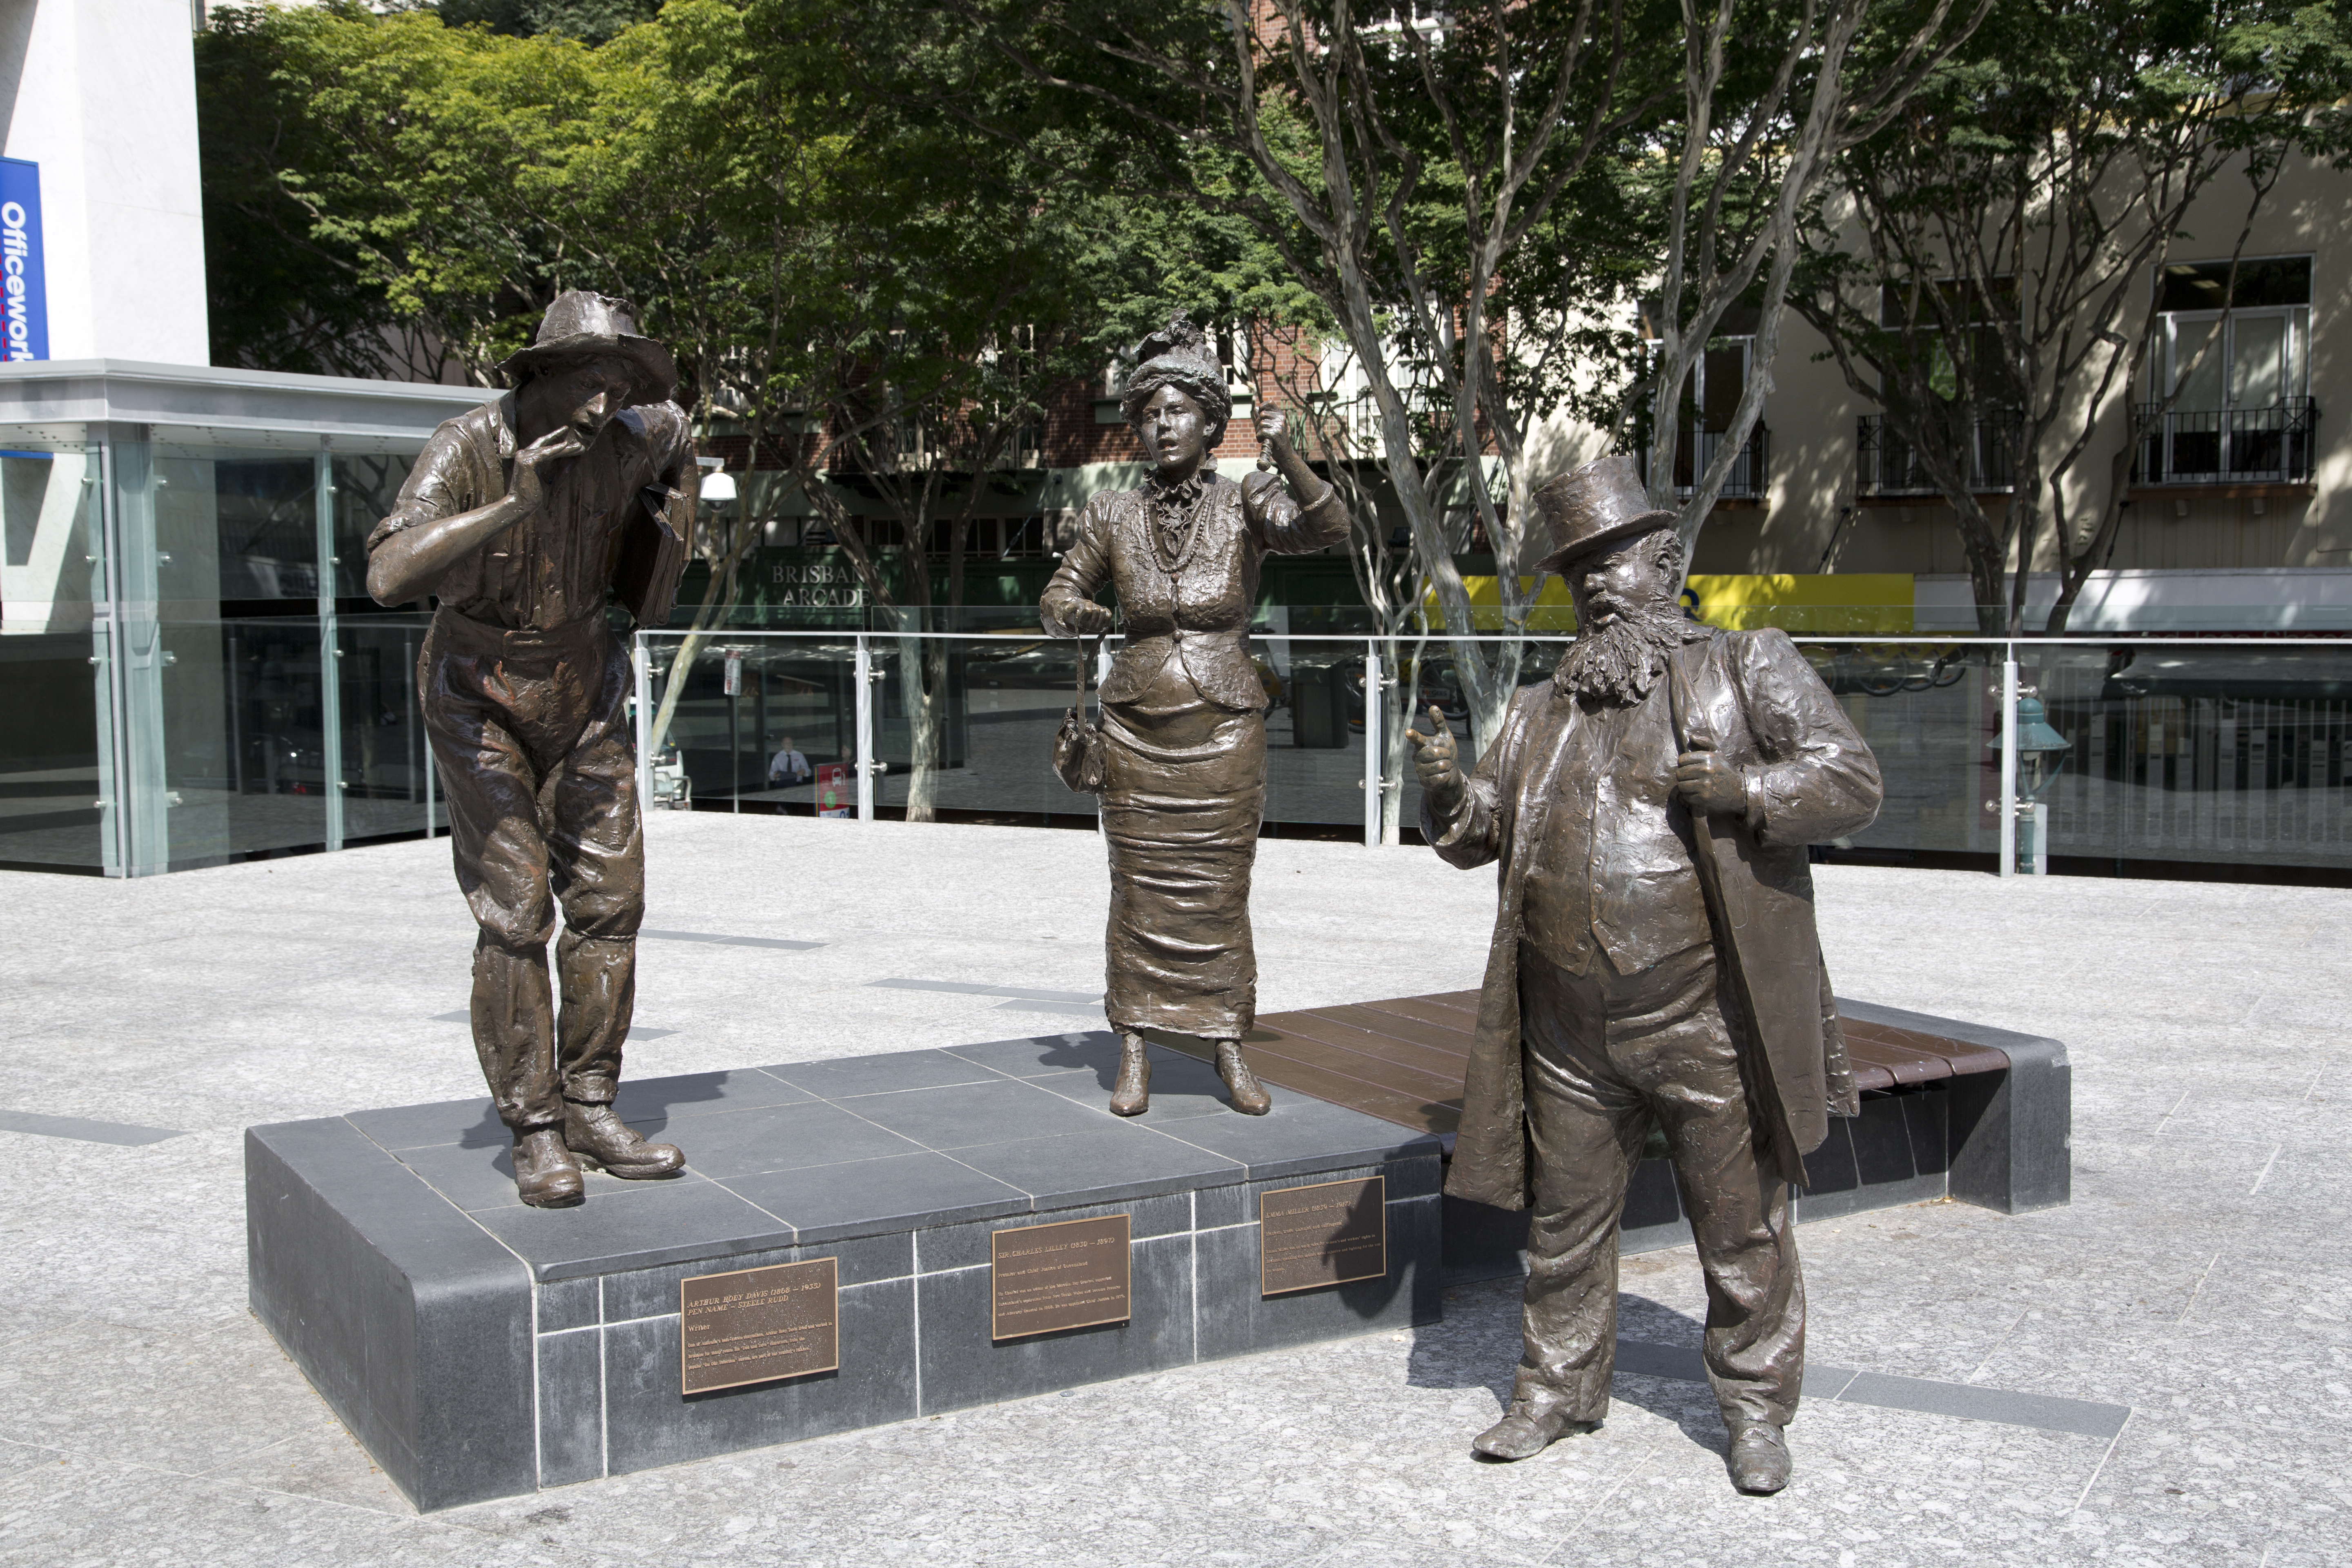 This is an image of statues in King George Square